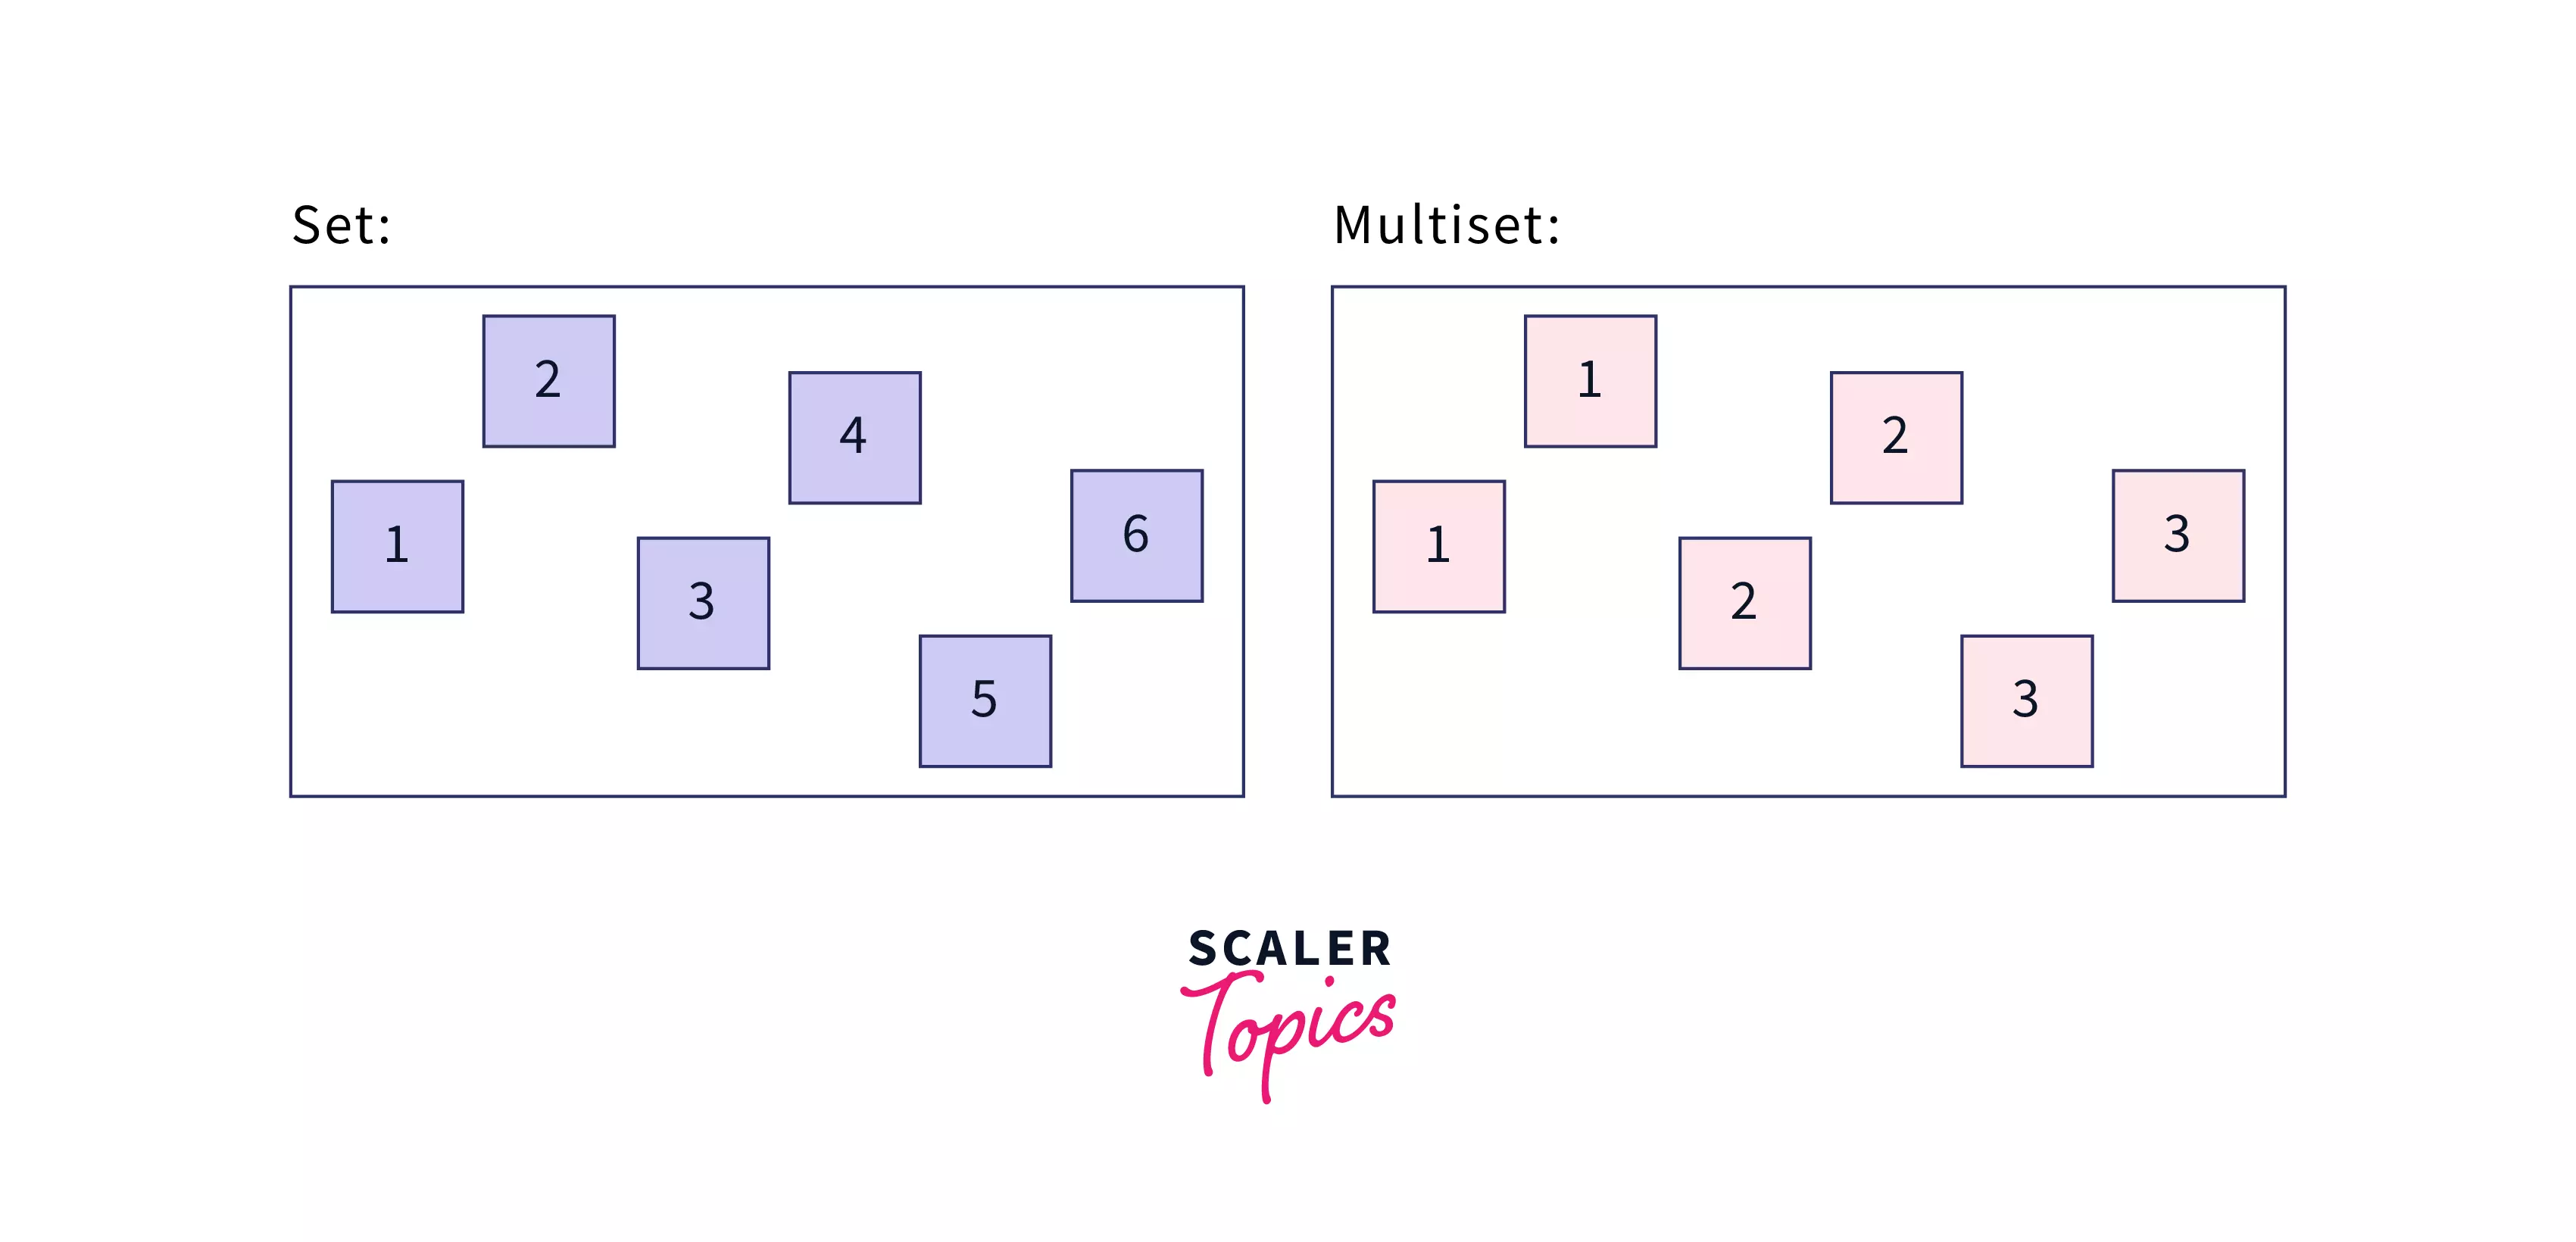 Creating a multiset